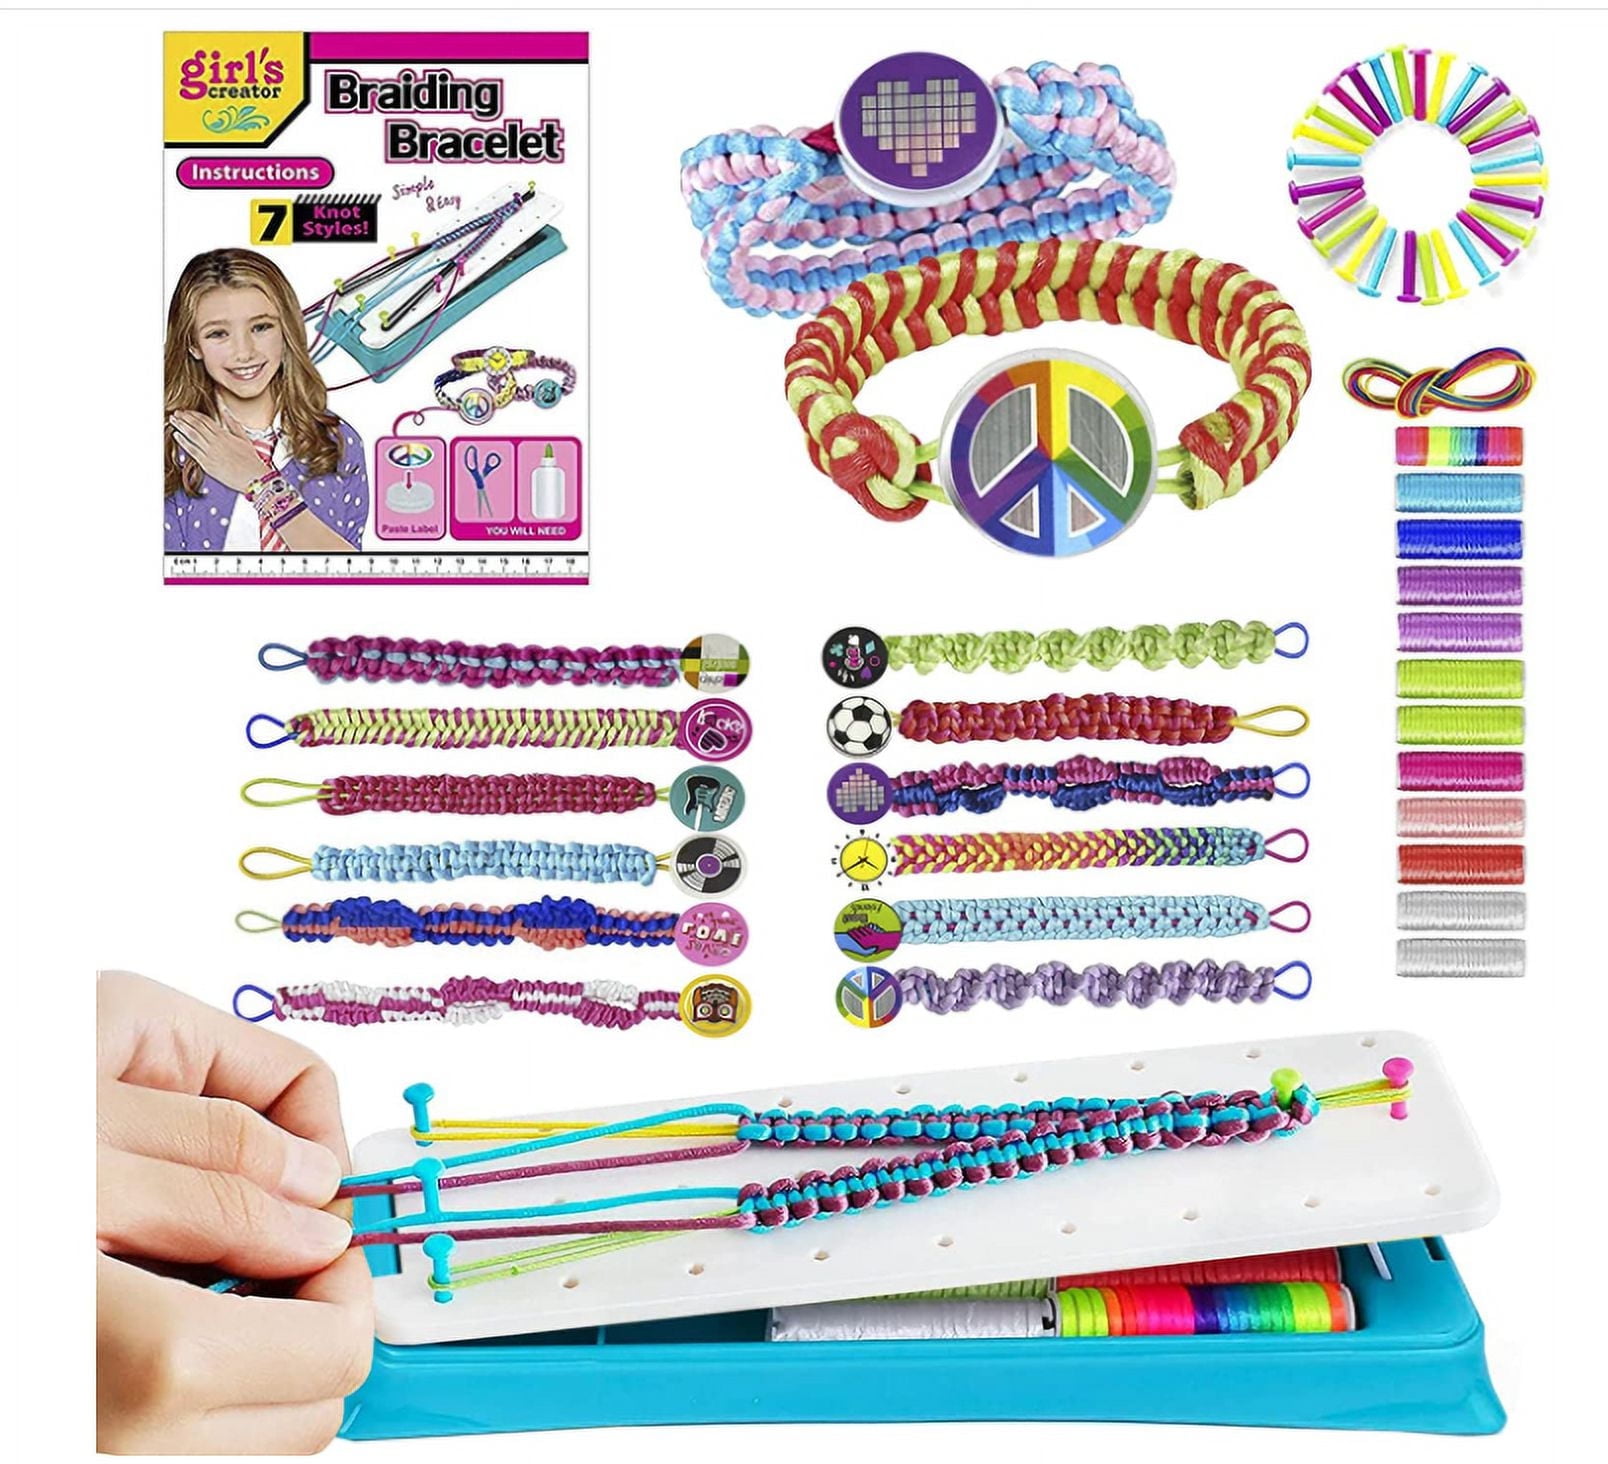 Bracelet Making Kit, Kids Loom Friendship Bracelets Maker Crafts Toys for Age 6 7 8 9 10 11 12 Year Old Girls Gift Birthday Christmas Gifts for 6-12 Year Olds Girl Teen Travel Activity Set - image 1 of 7